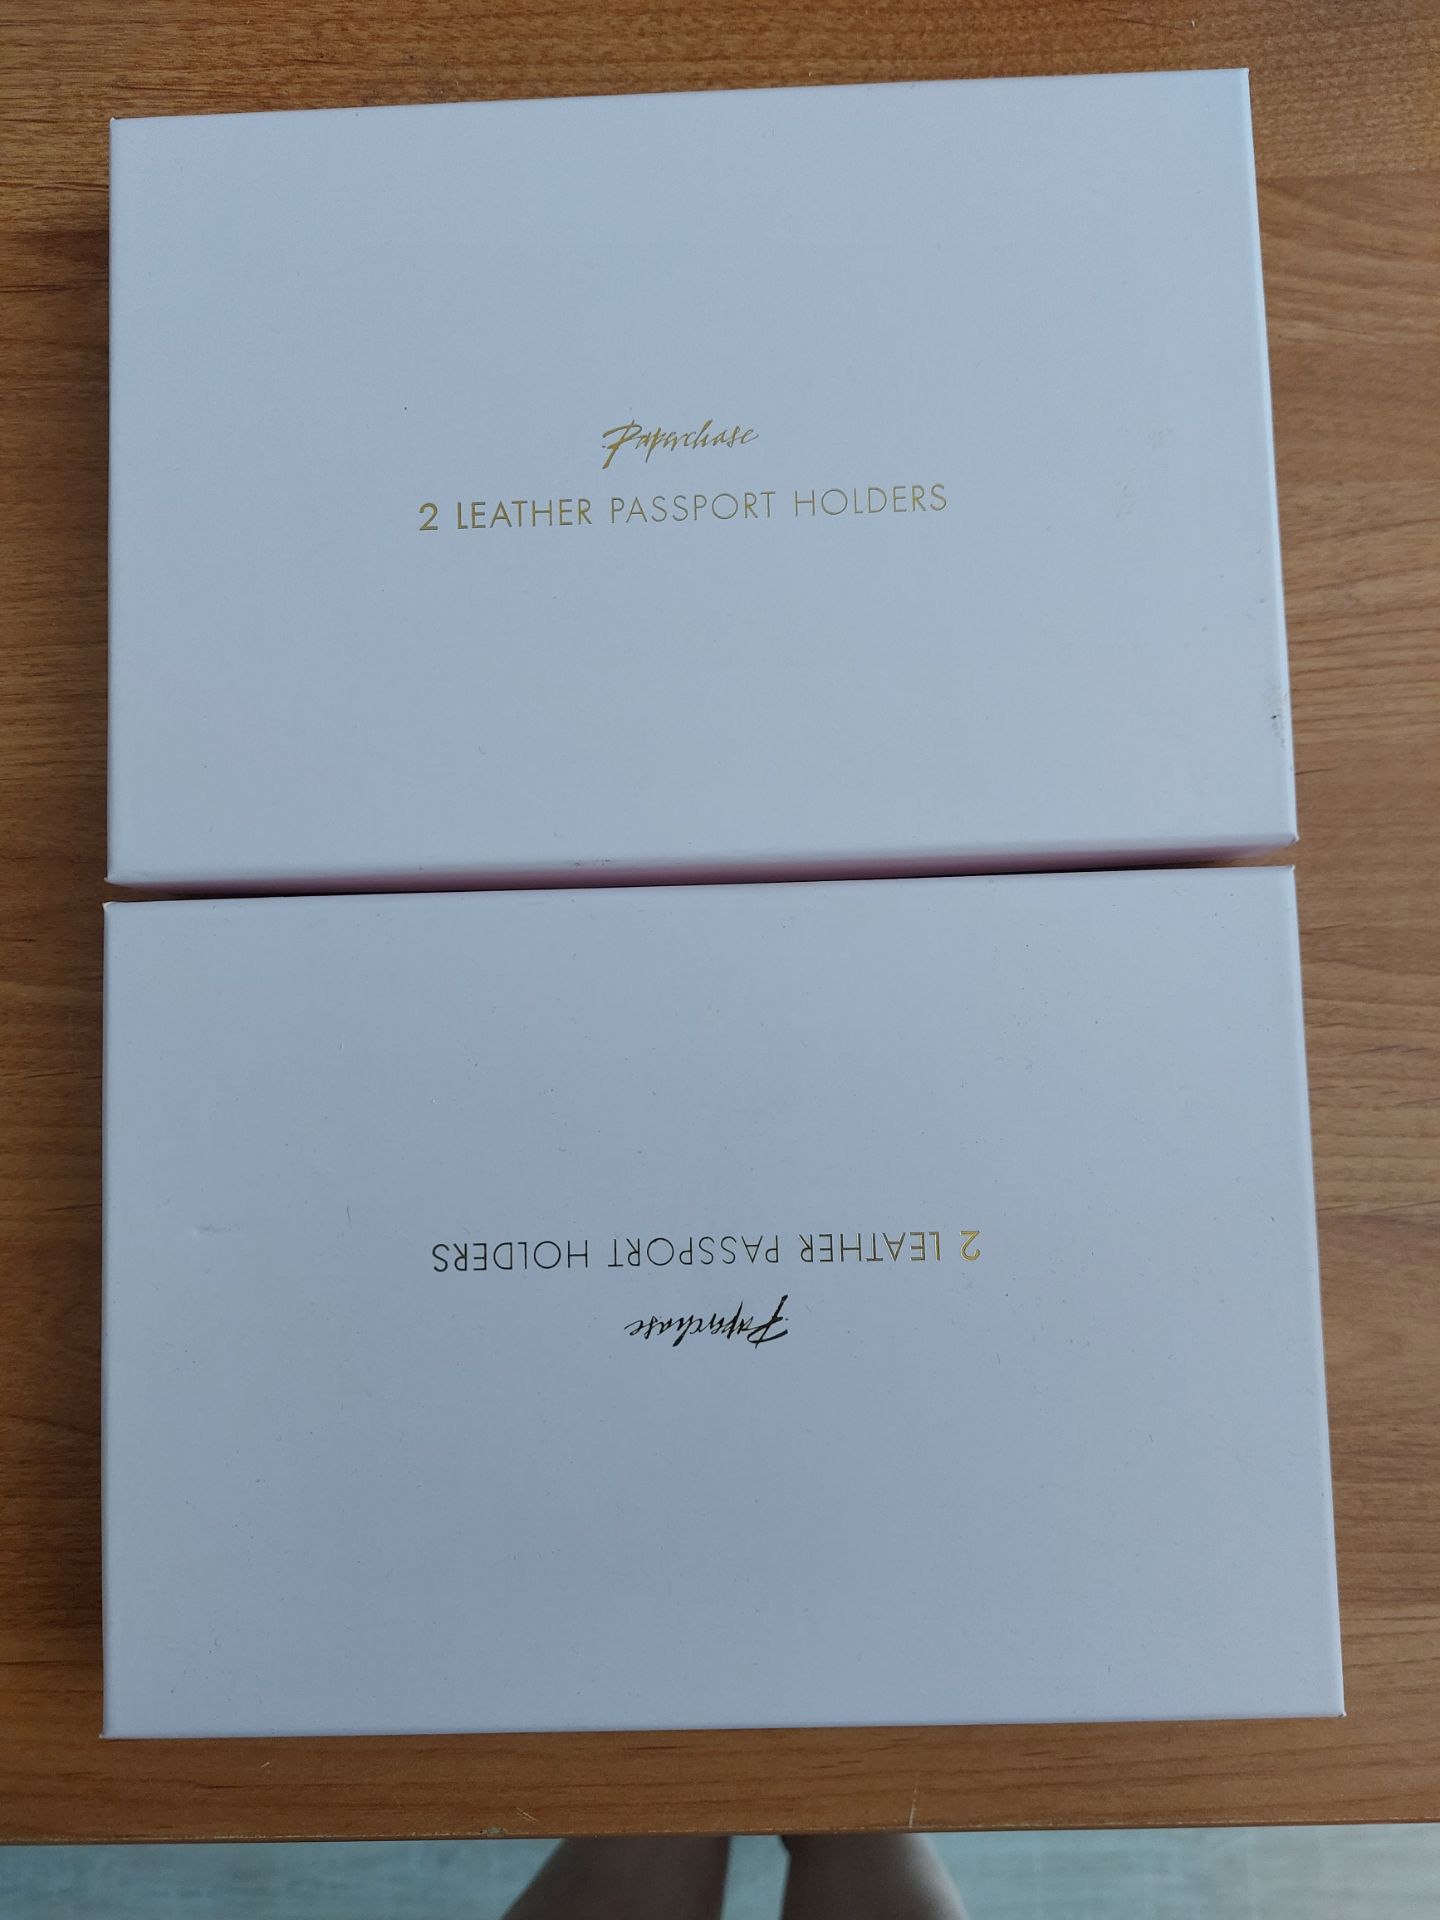 Wedding Passport Covers, 2 Sets of 2 - Image 5 of 6